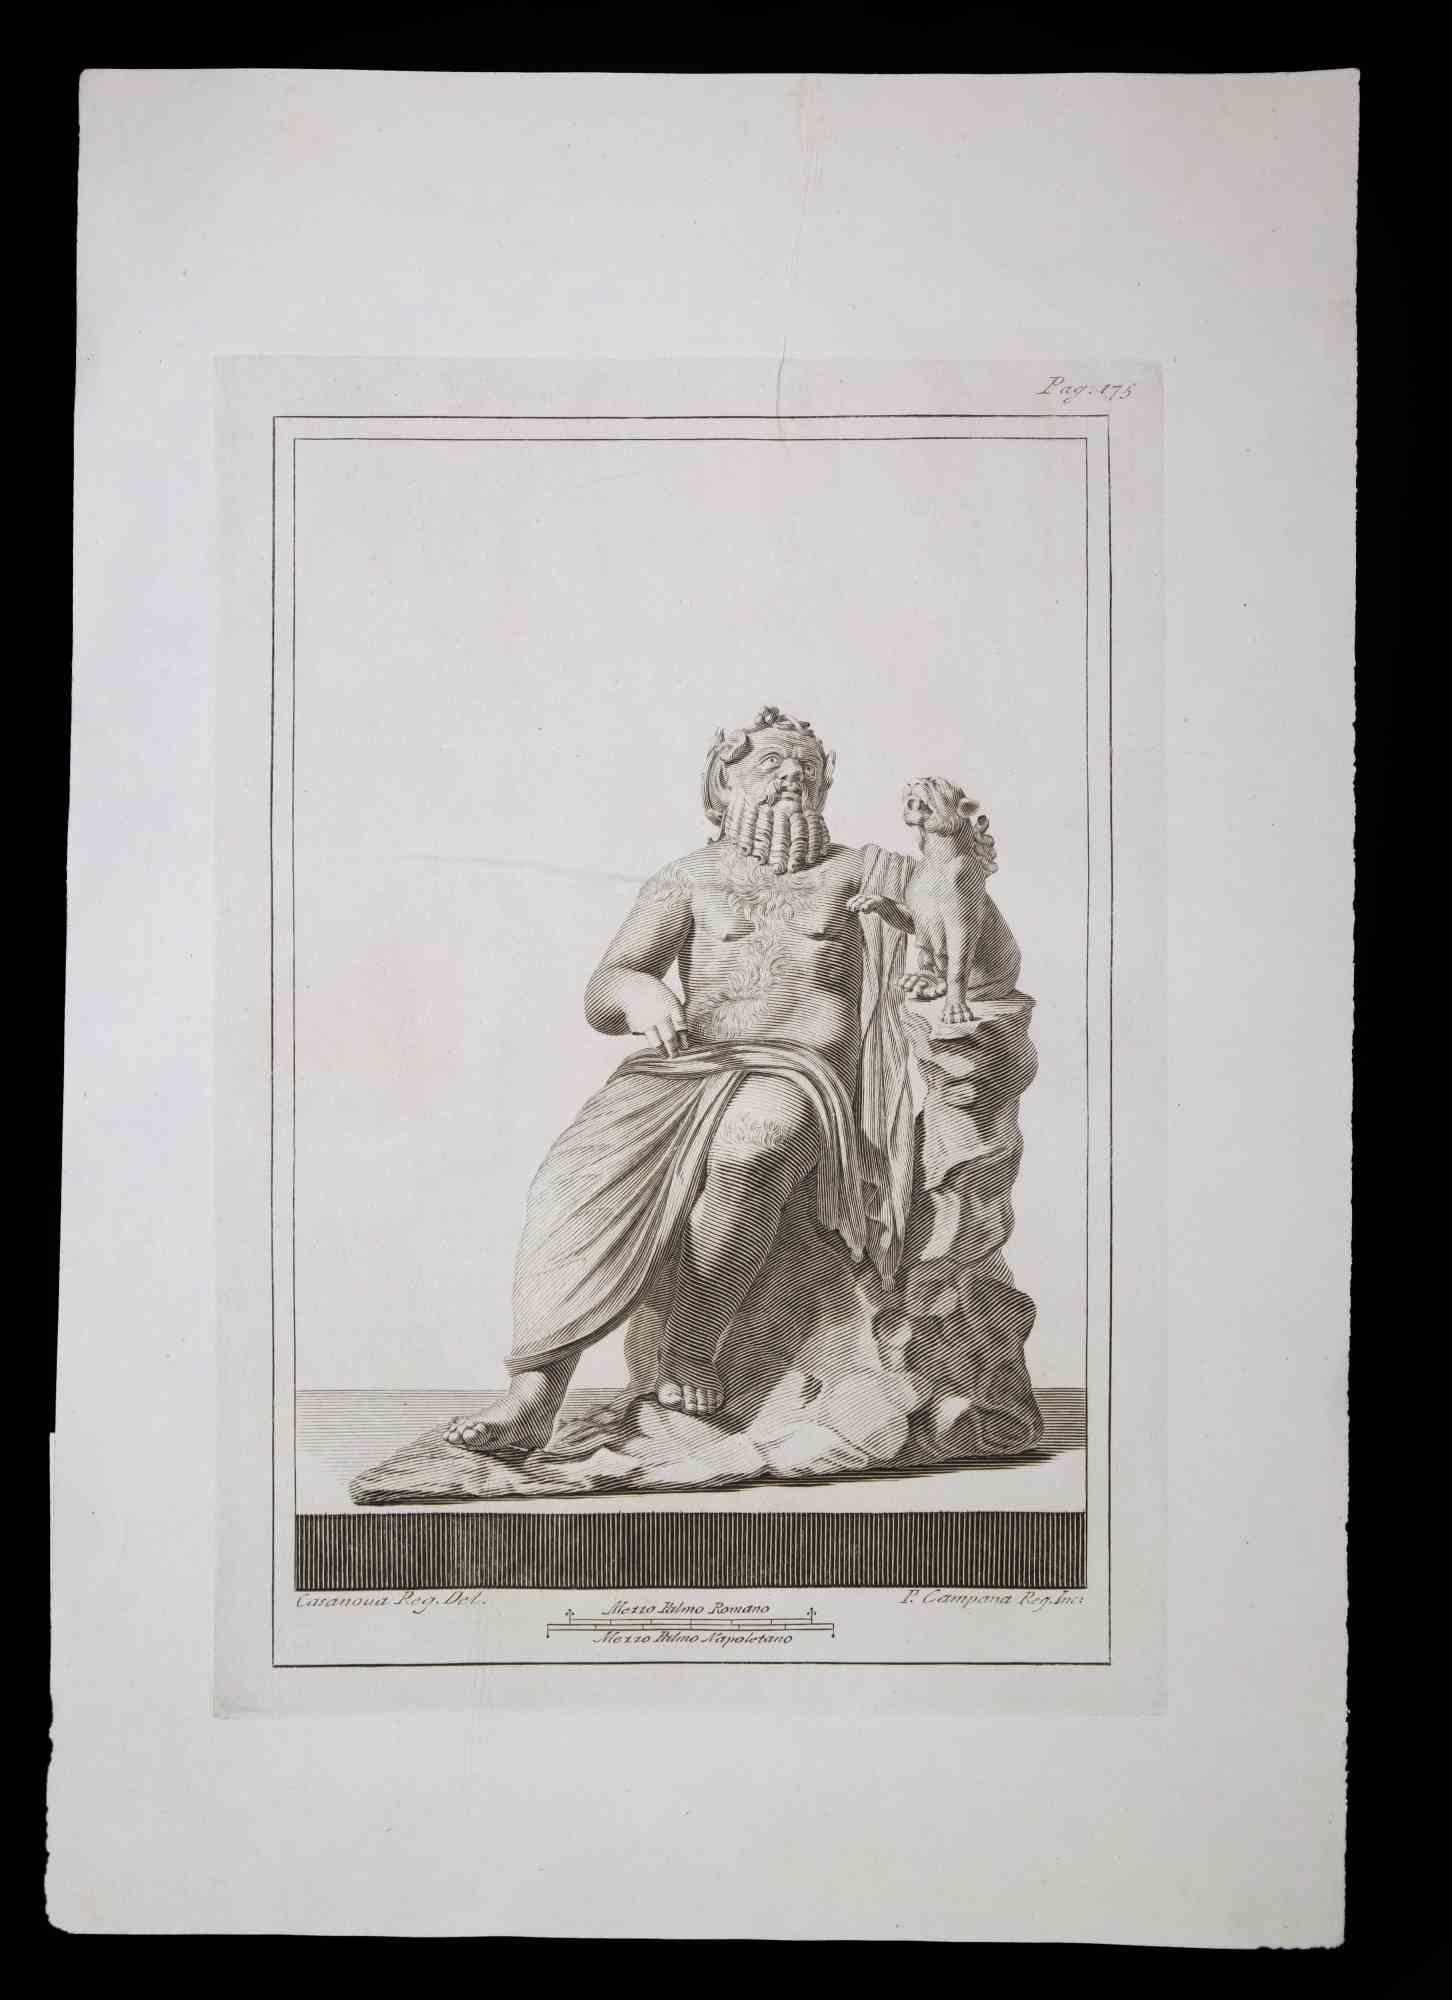 Ancient Roman Statue, from the series "Antiquities of Herculaneum", is an original etching on paper realized by P. Campana in the 18th Century.

Signed on the plate, on the lower right.

Good conditions with slight folding.

The etching belongs to